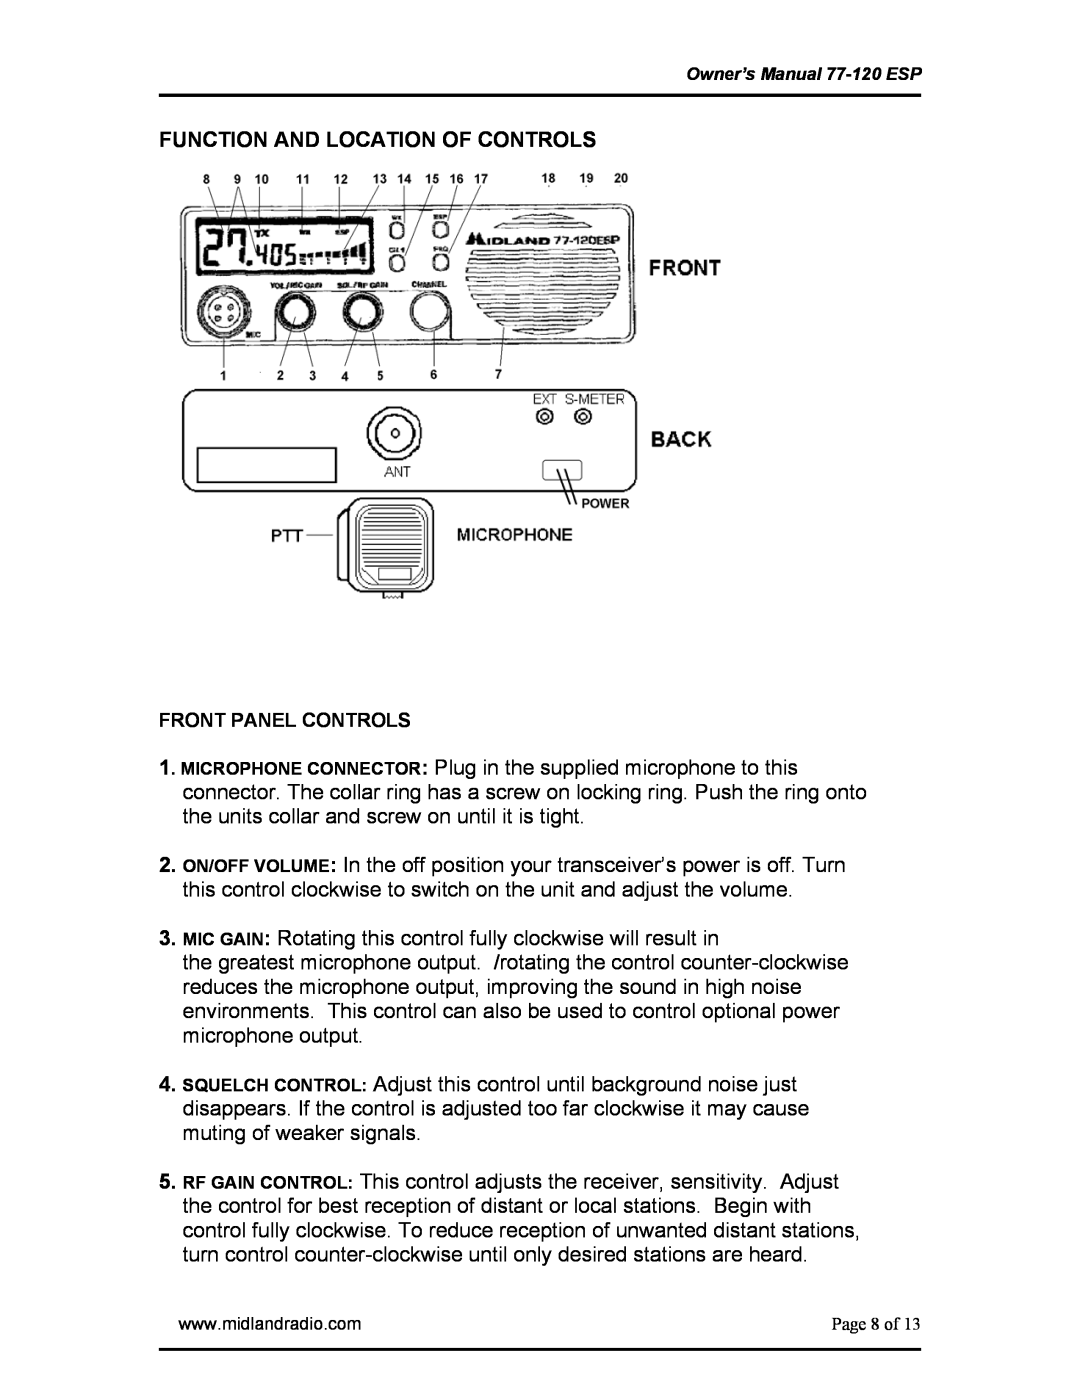 Midland Radio 77-120ESP owner manual Function And Location Of Controls, Front Panel Controls 